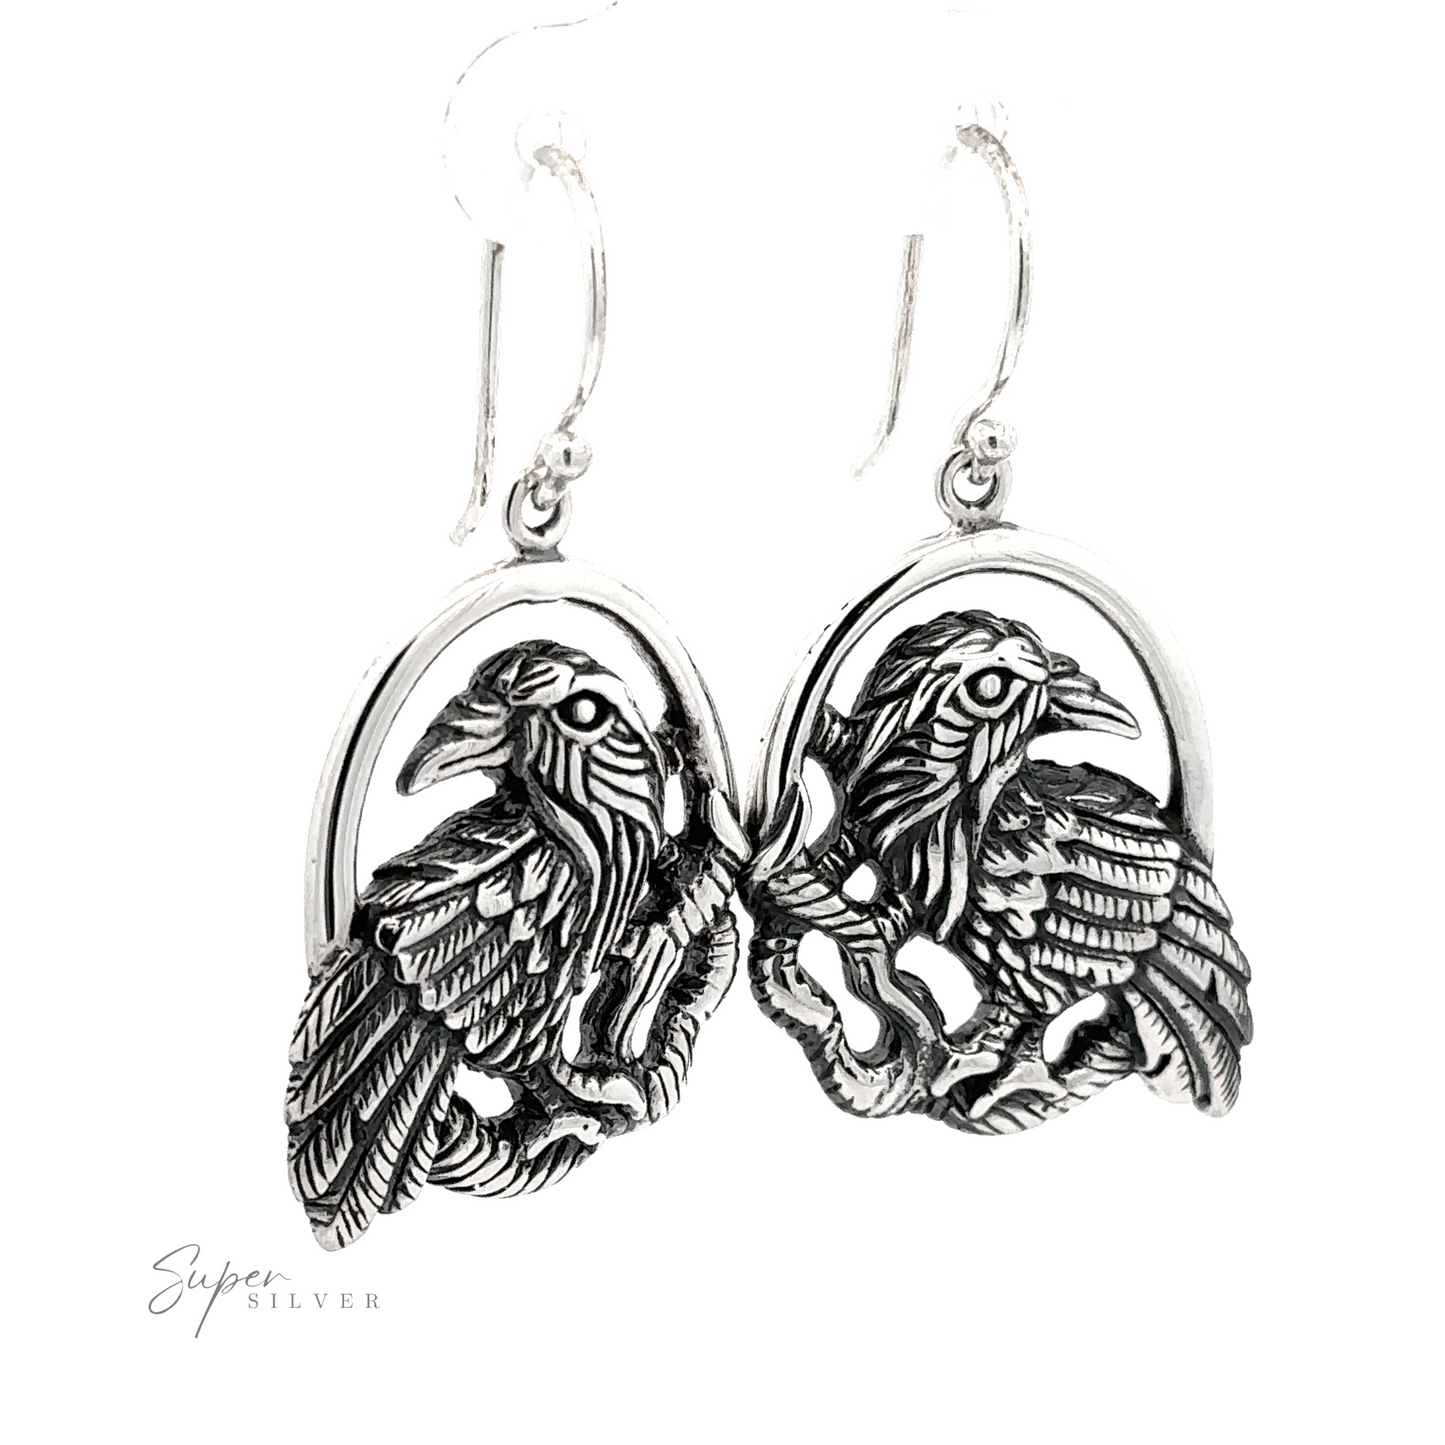 A pair of Detailed Raven Earrings, each featuring an intricate eagle design, on a white background with a "super silver" signature.